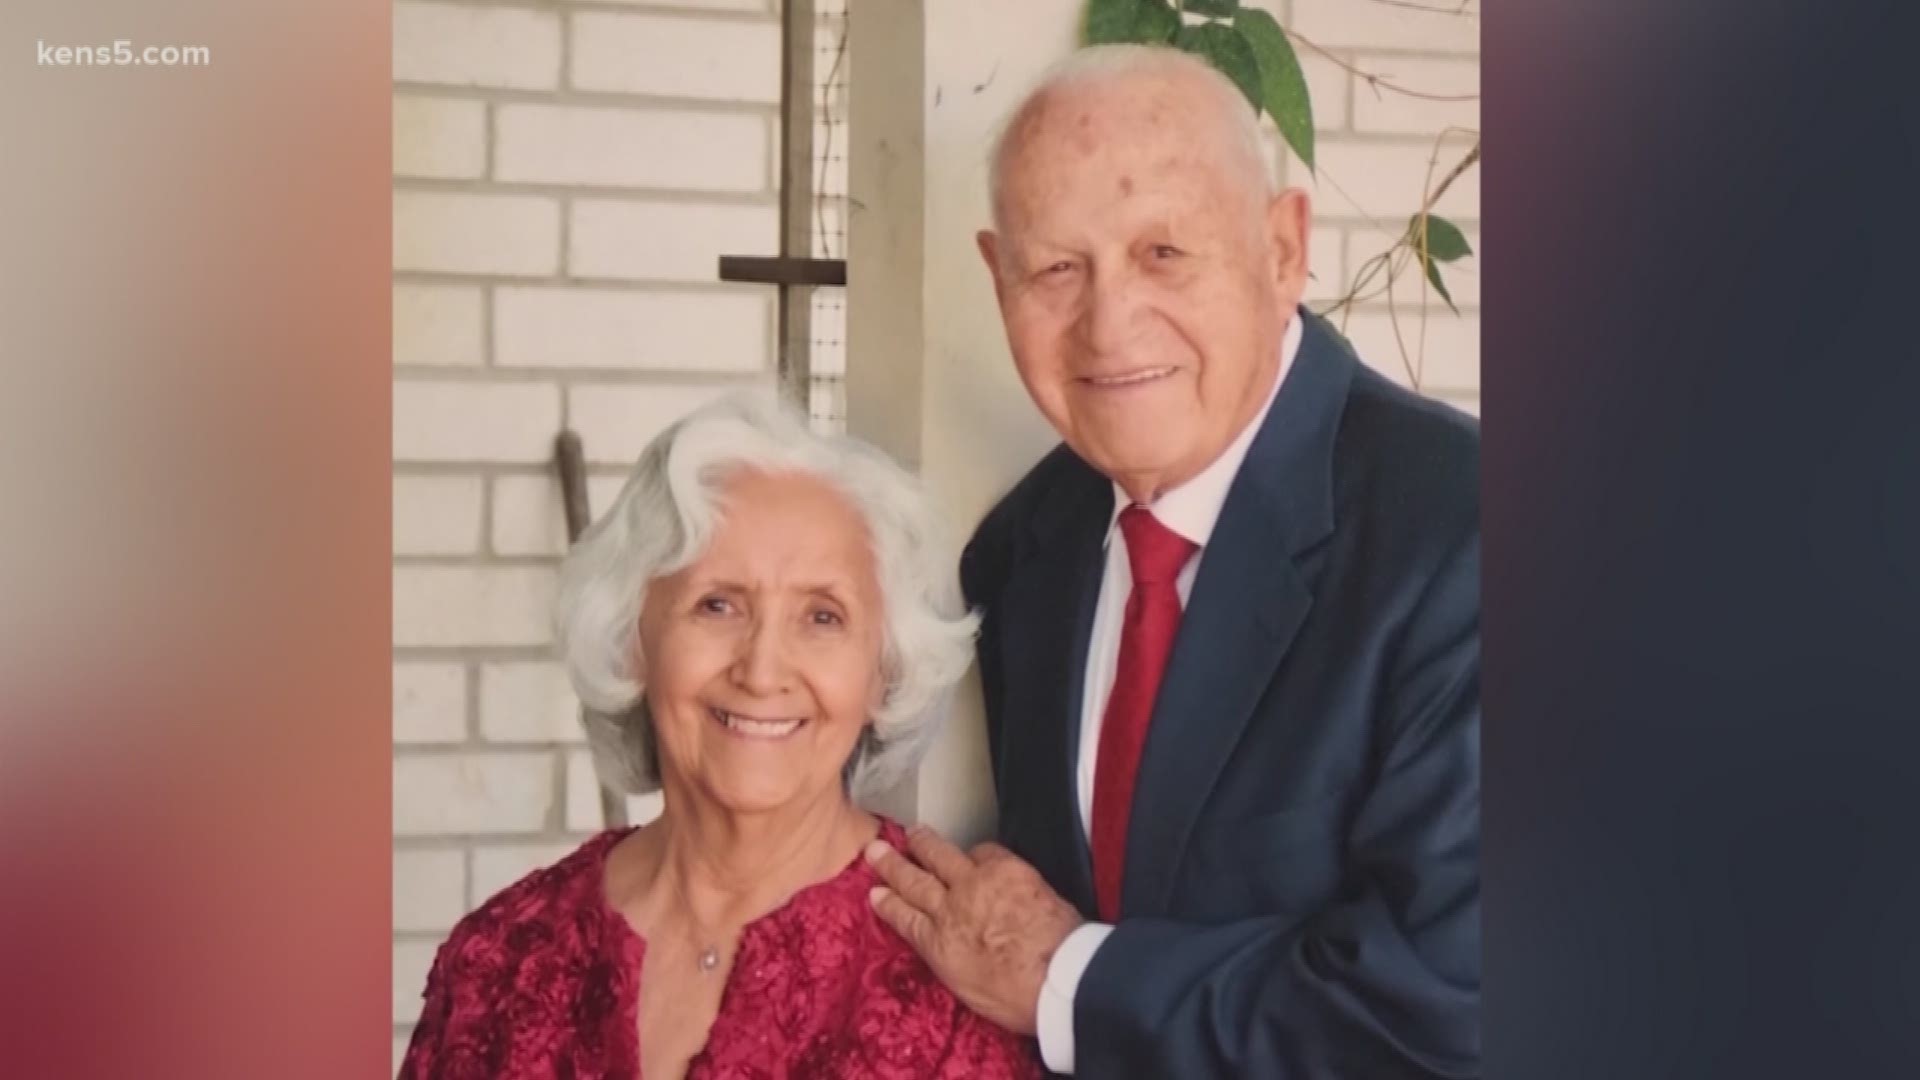 Two pastors who have spent more than six decades serving the San Antonio community were nearly killed Saturday morning.